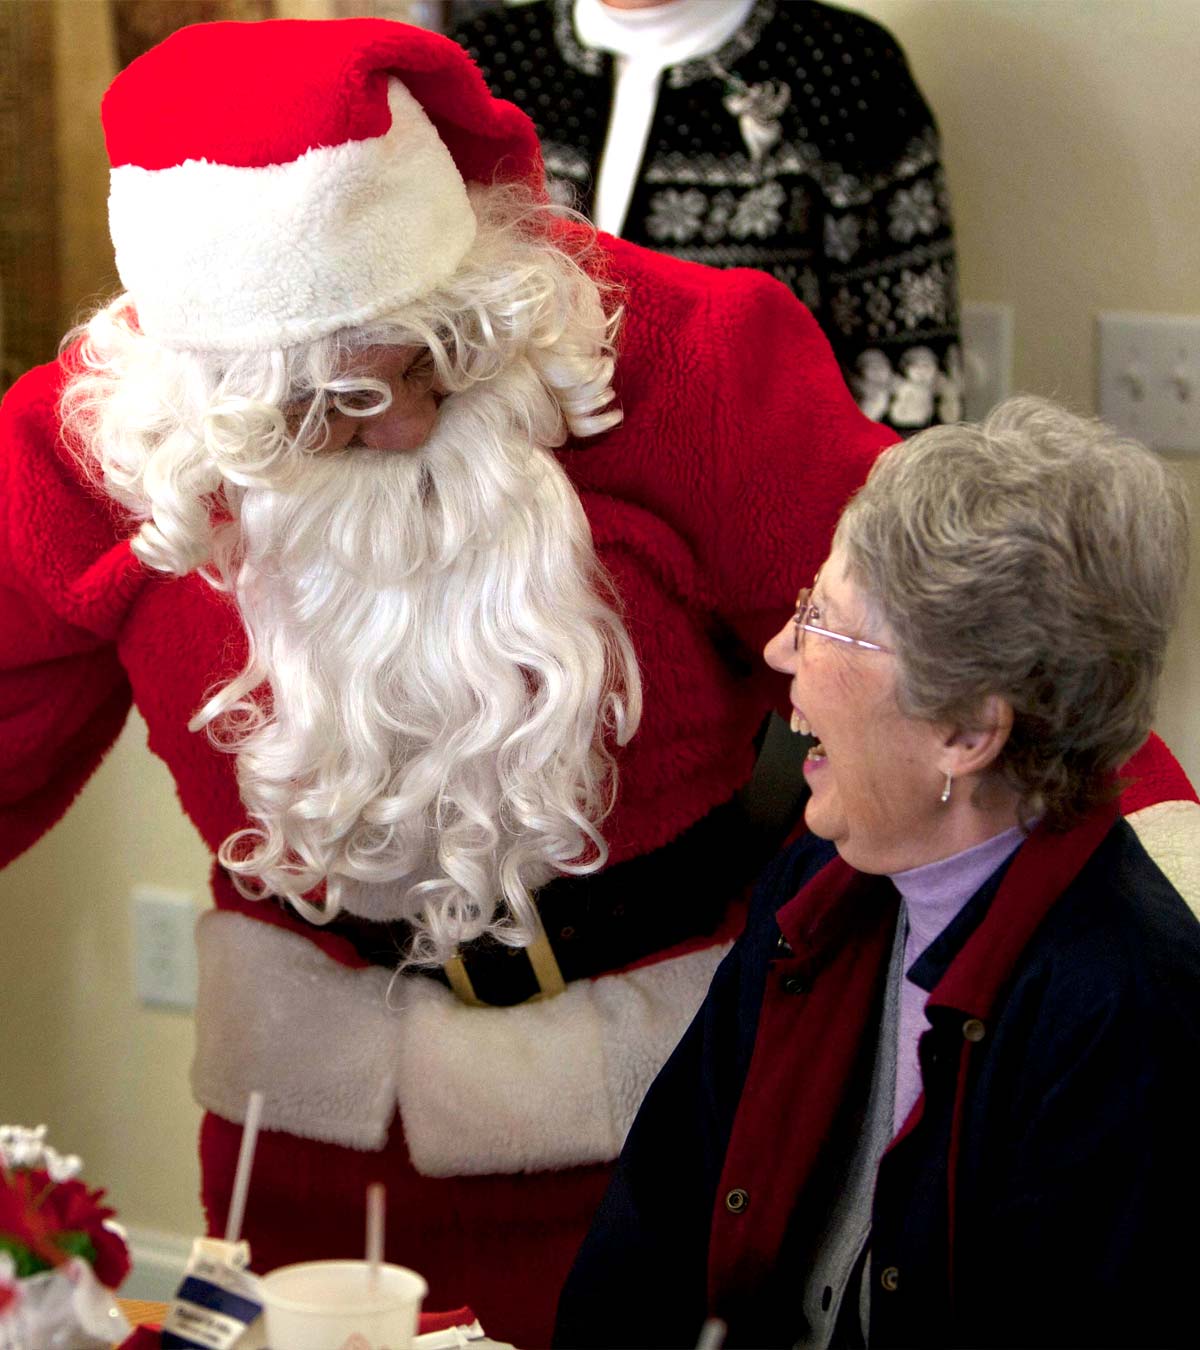 Gifts for the Elderly this Holiday season 2021, Senior Home Care